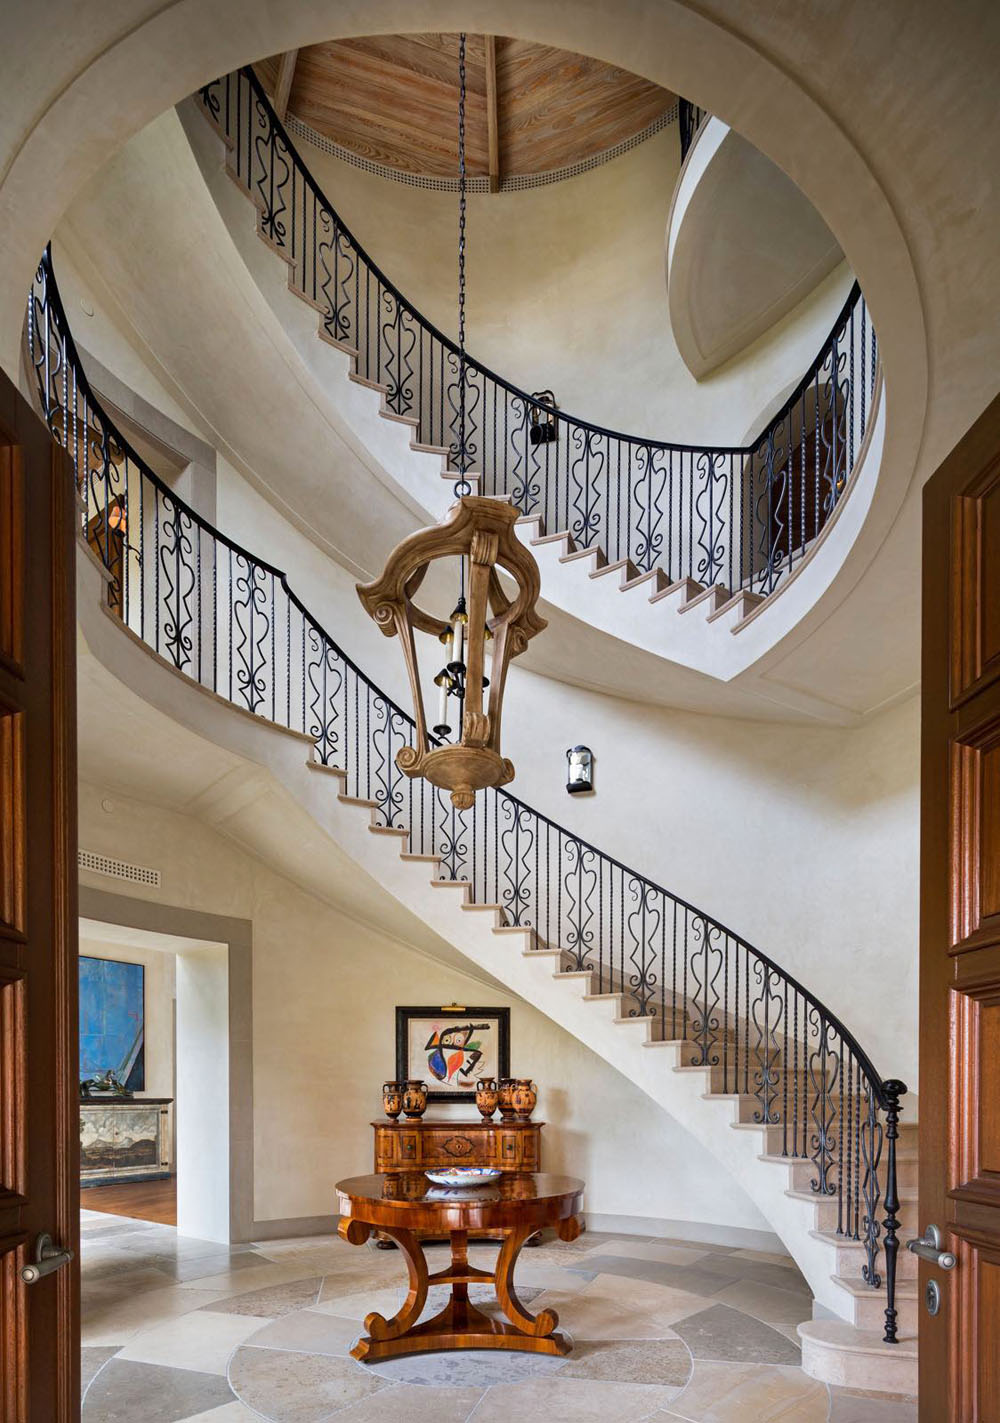 Mediterranean Revival Curved Staircase